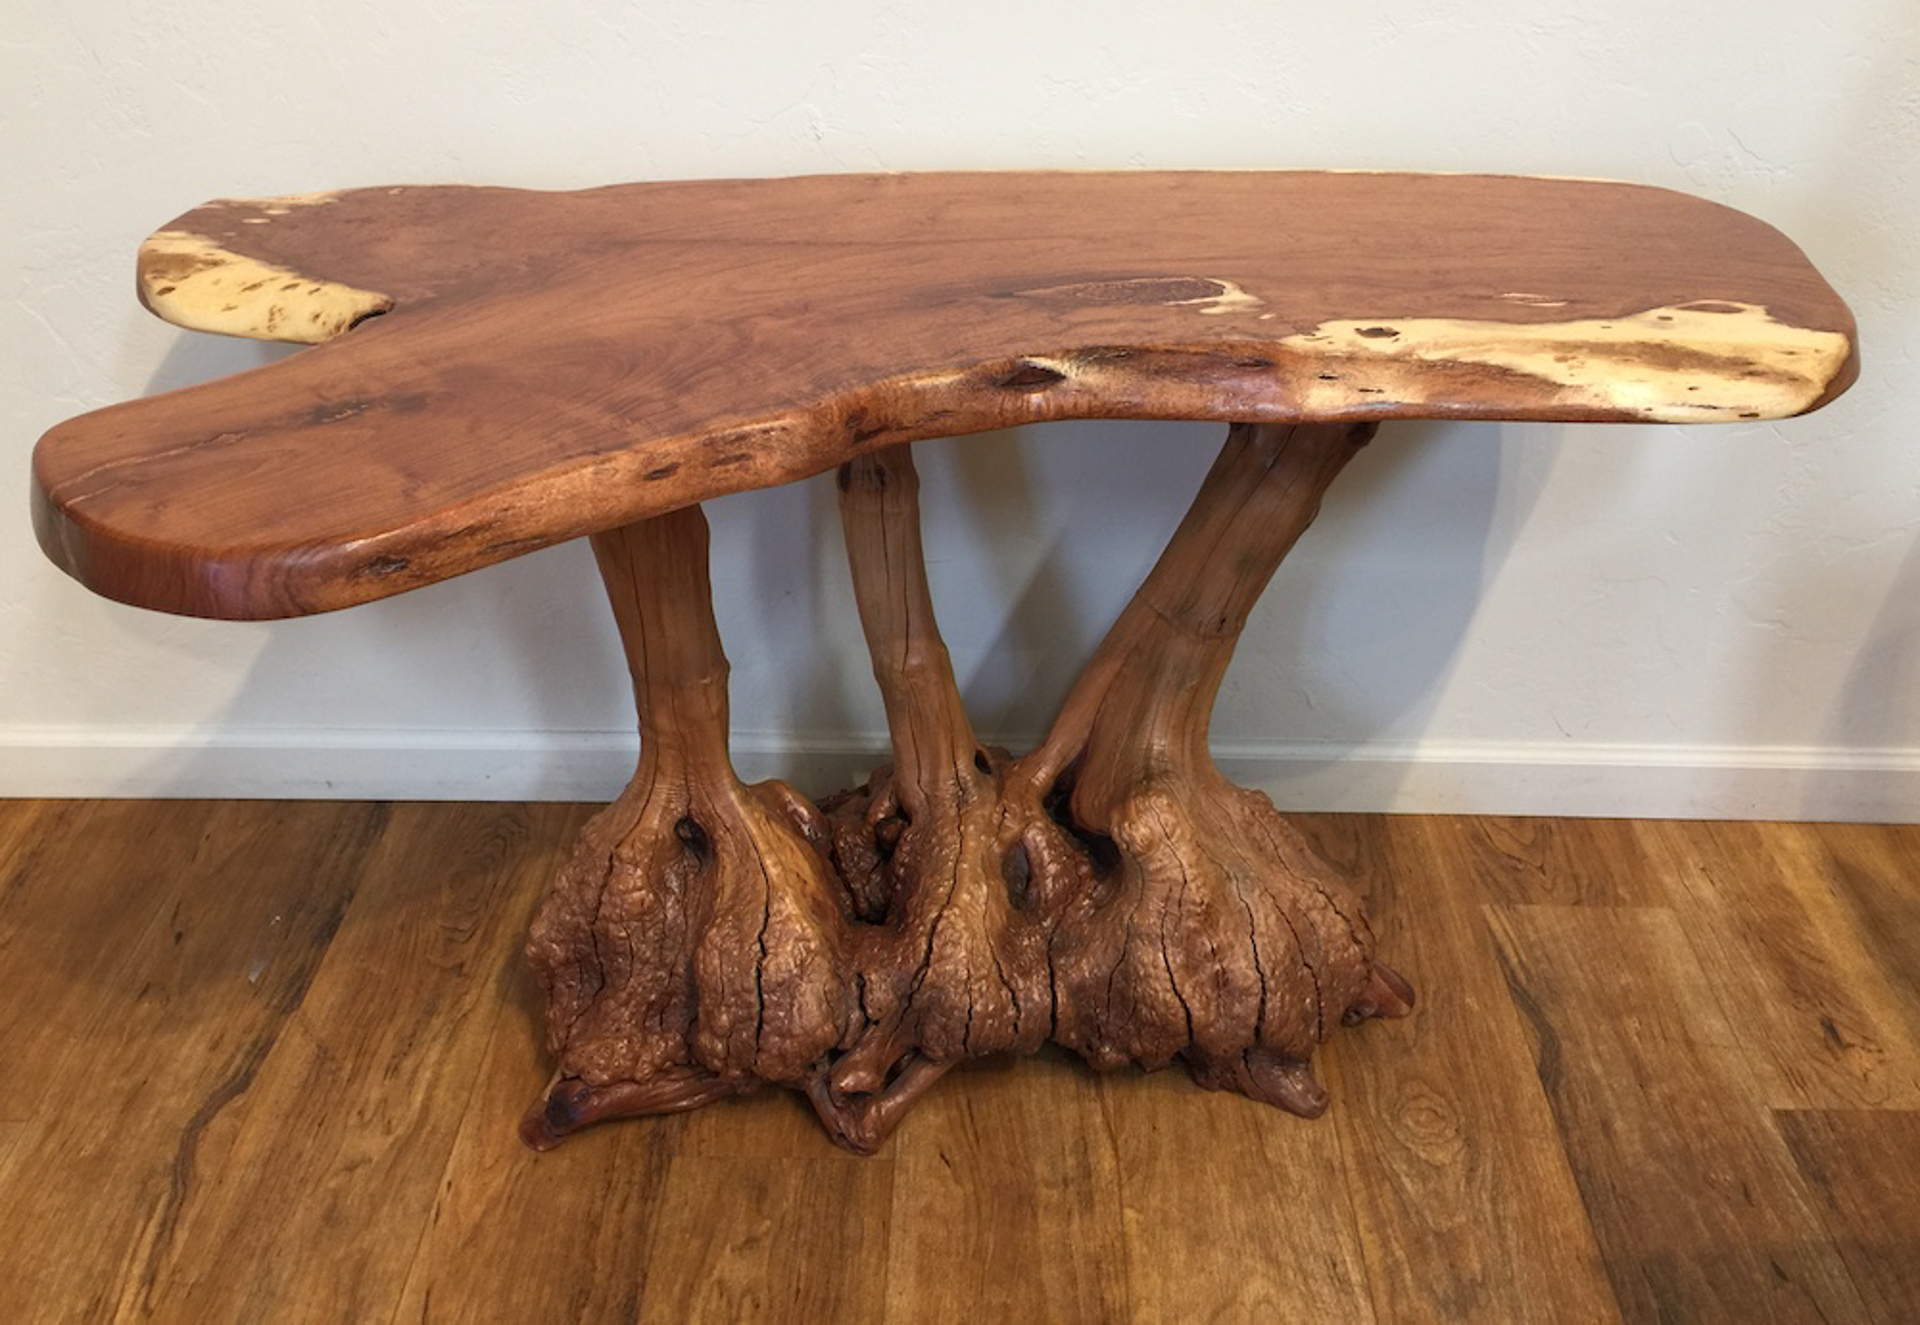 Hall/Sofa Table - Mesquite Top With Manzanita Root Burl Base by Gary Rennert